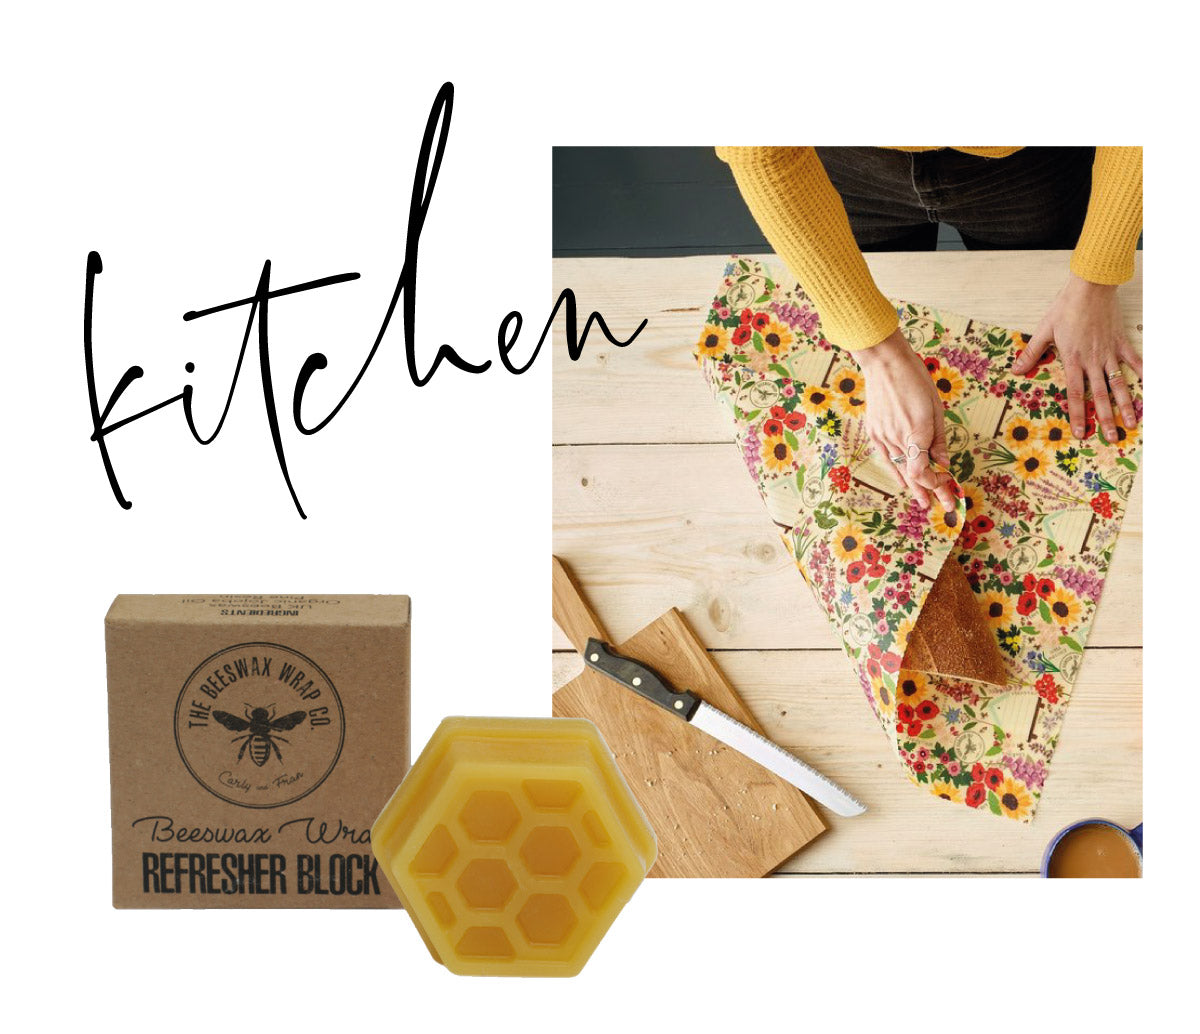 Plastic free products for the kitchen